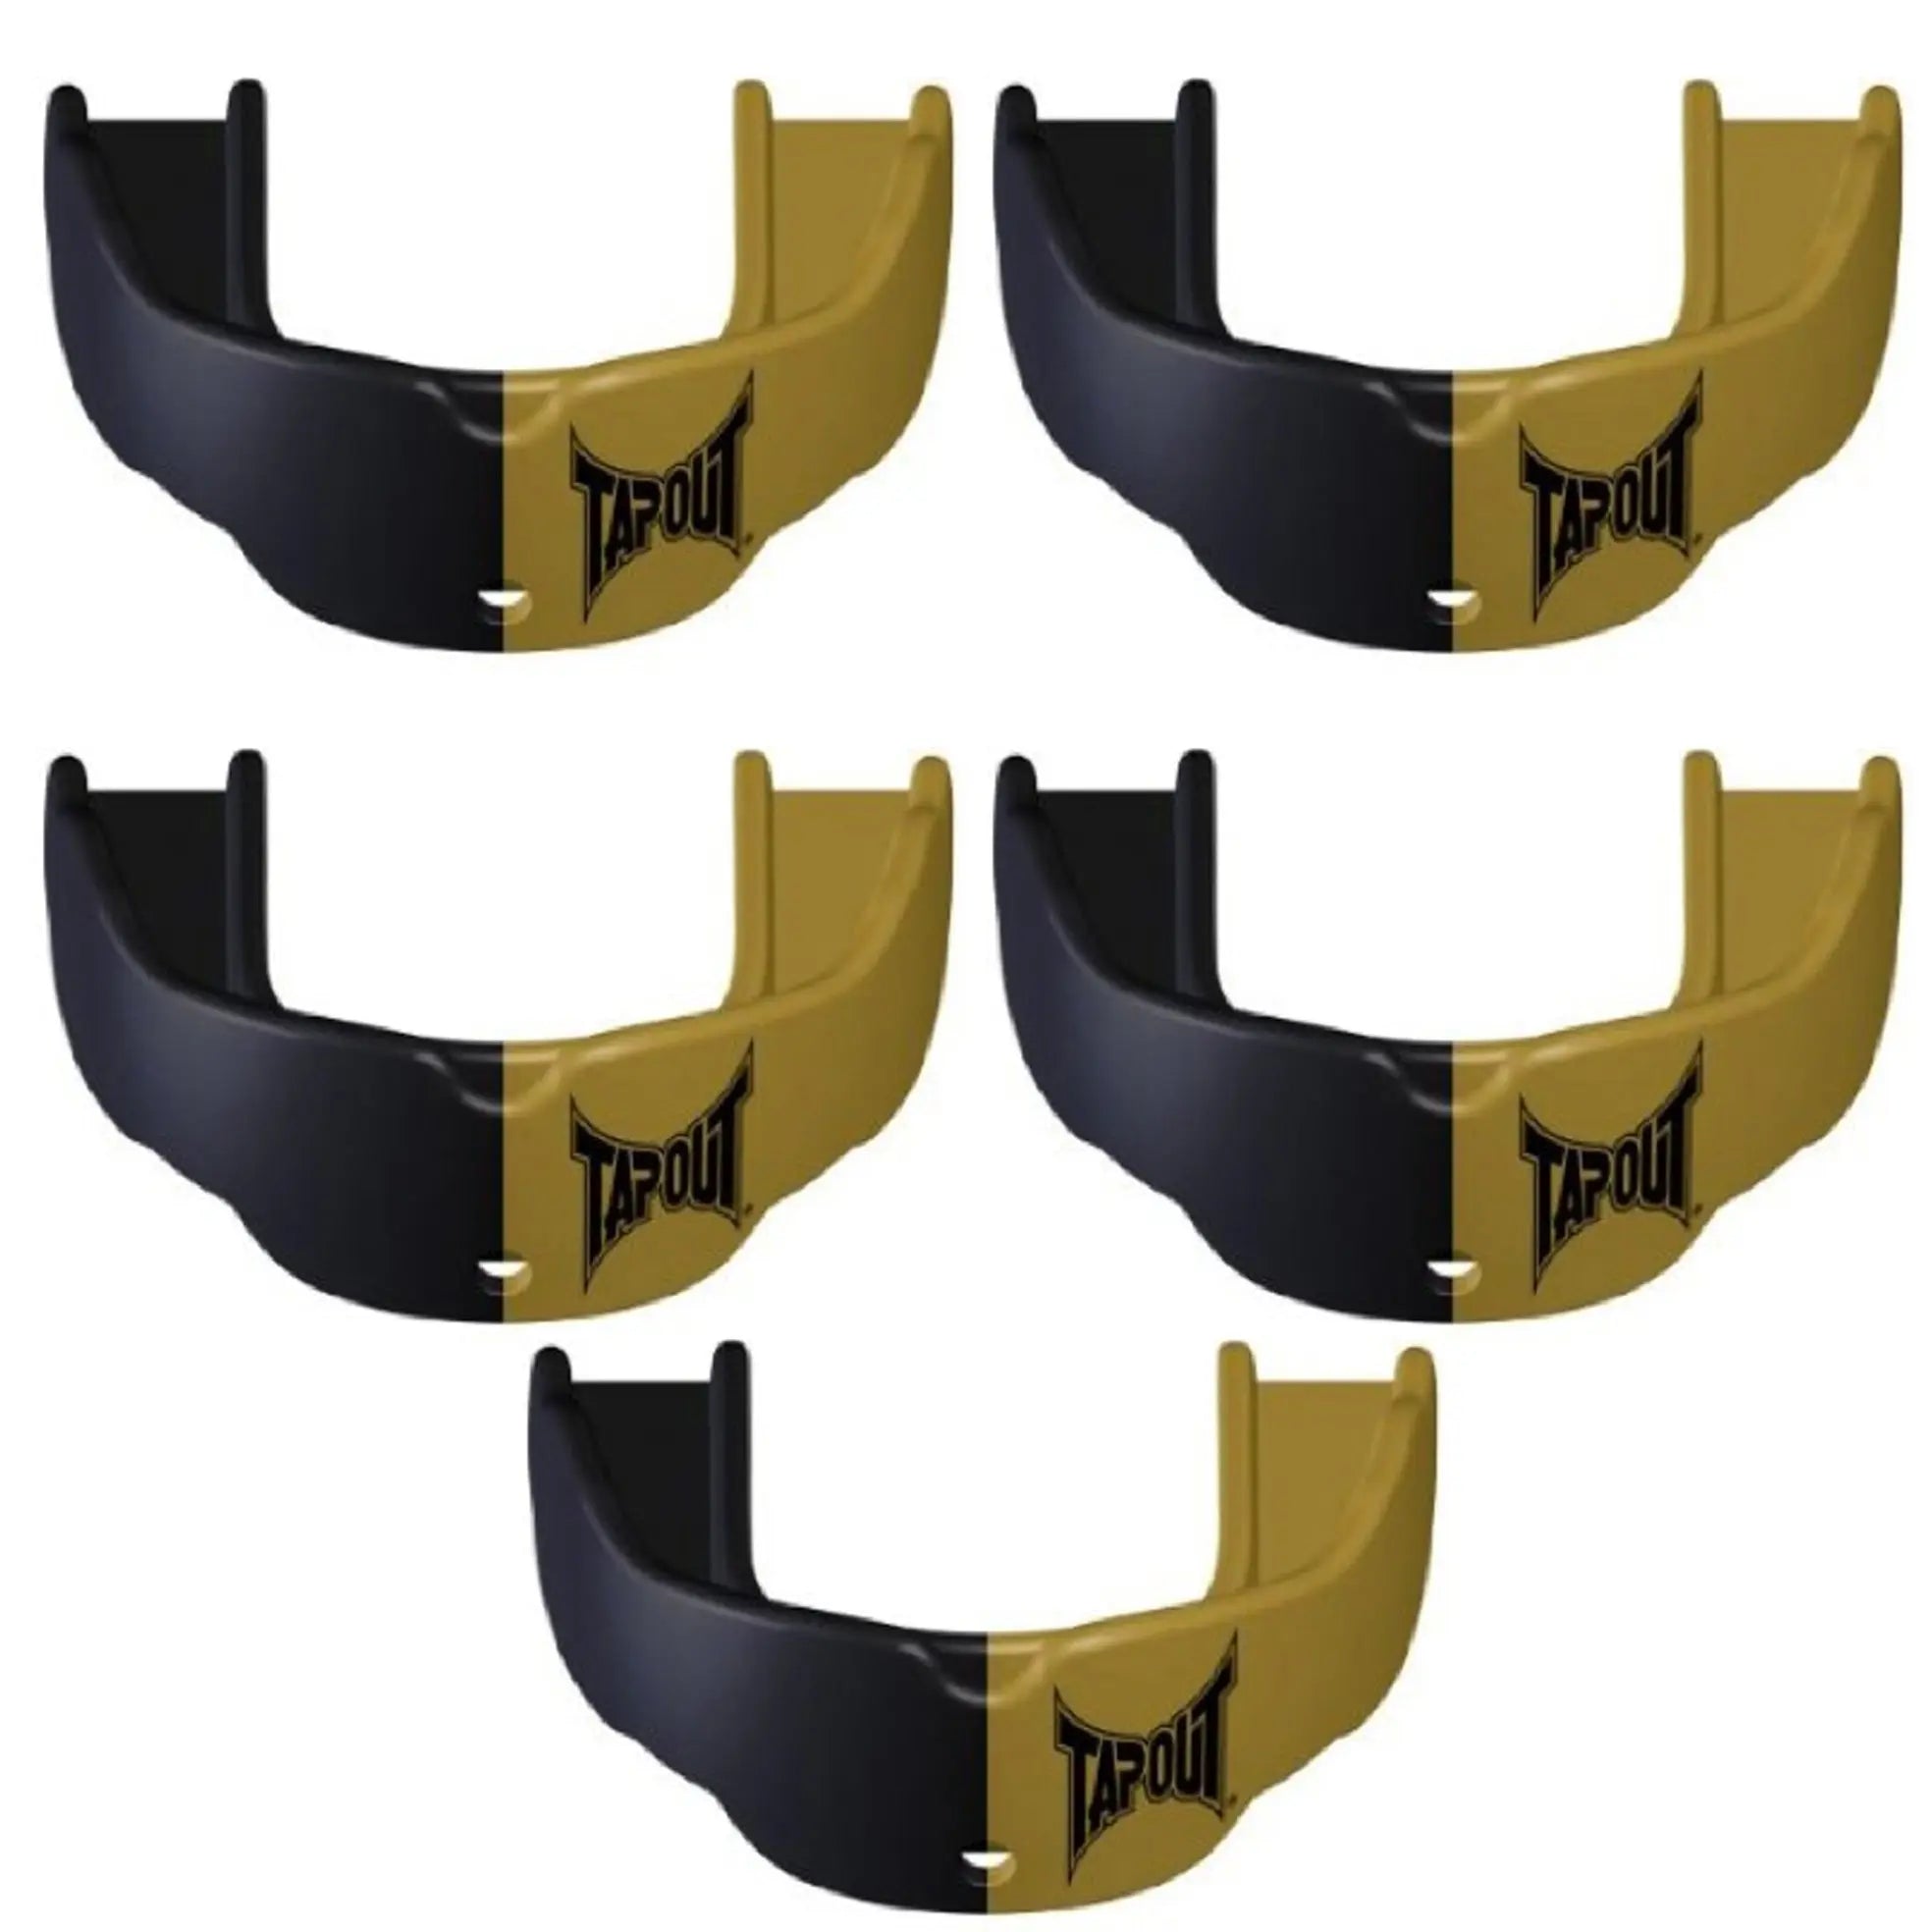 Tapout Youth Protective Sports Mouthguard with Strap 5-Pack - Gold/Black Tapout